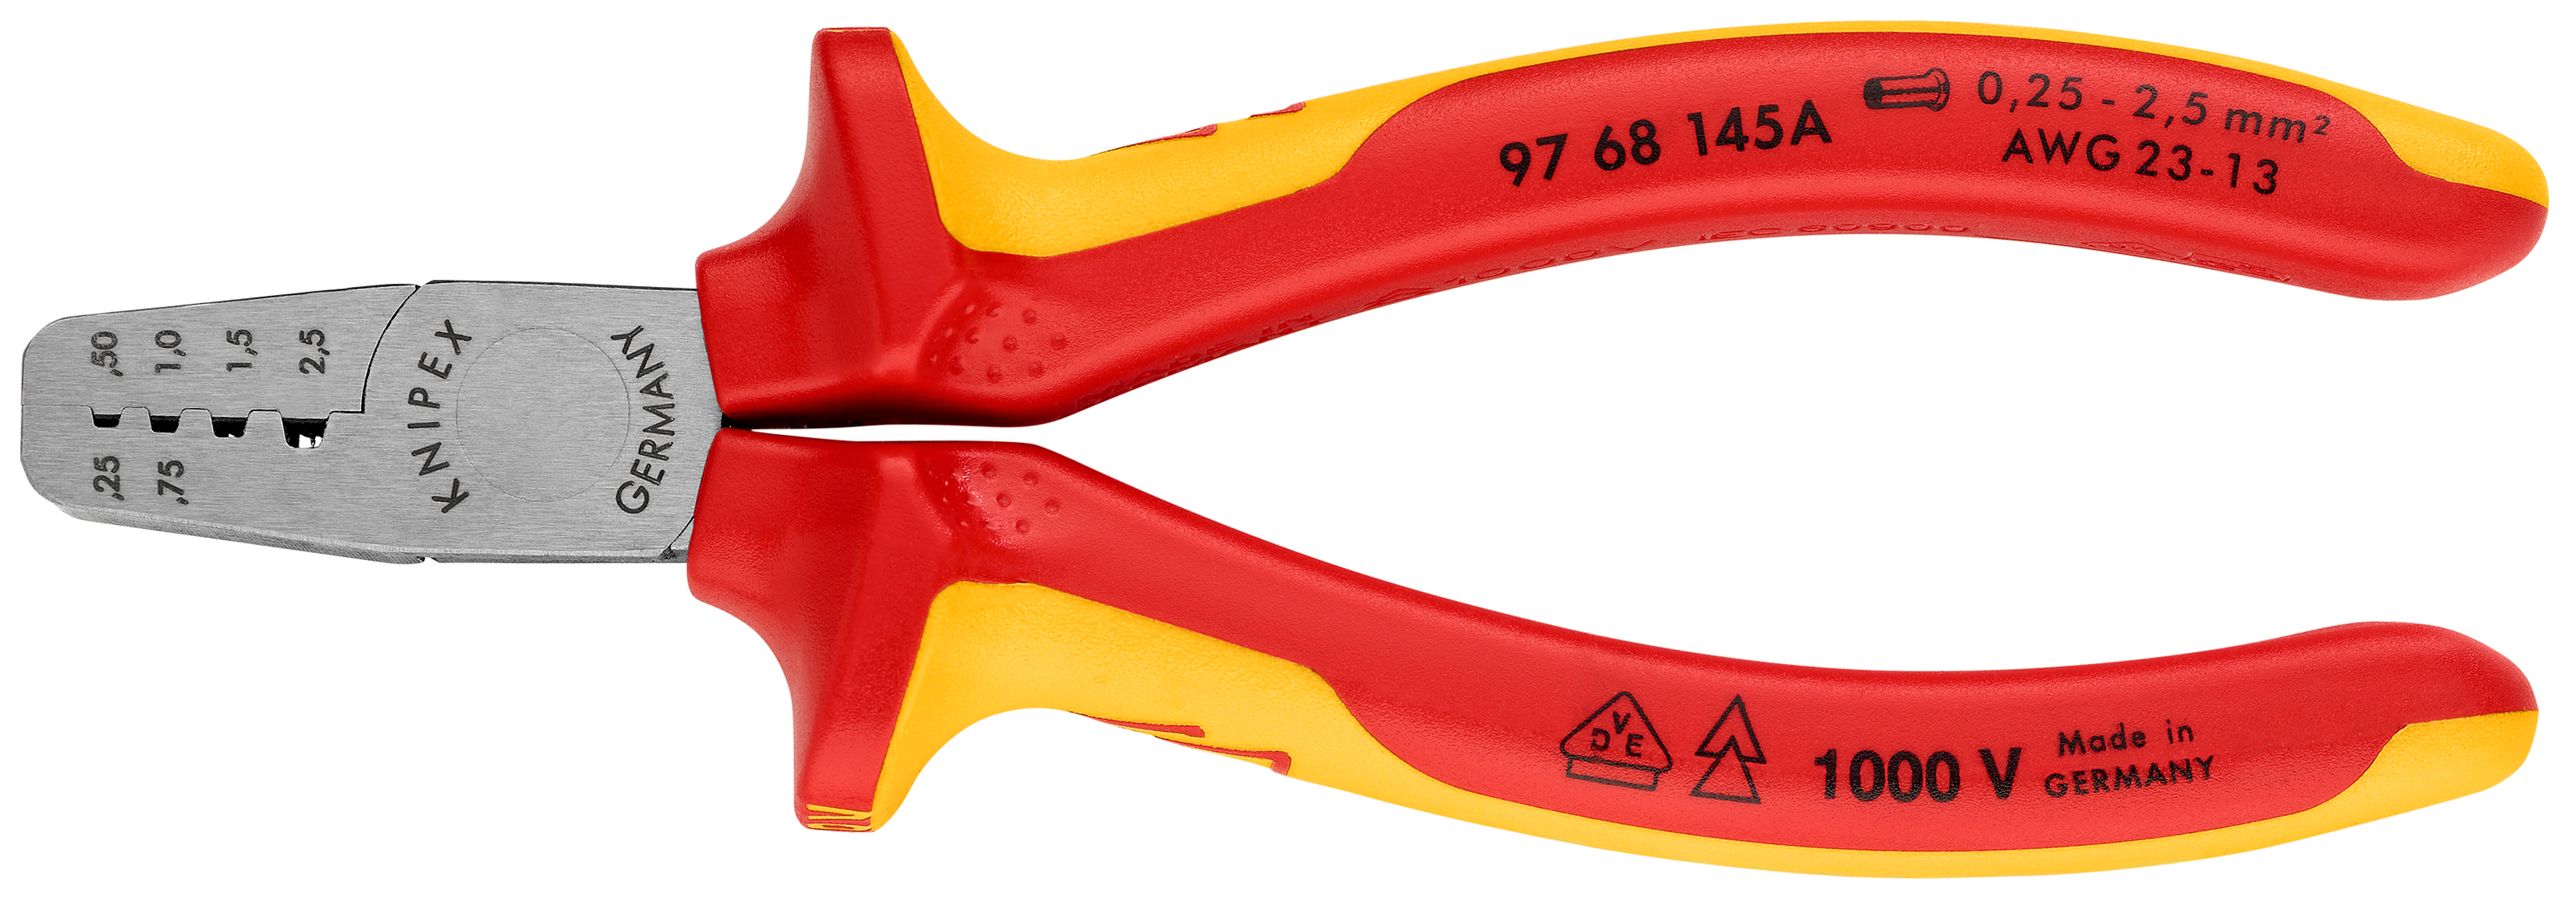 Crimping Pliers for Wire Ferrules-1000V Insulated | KNIPEX Tools